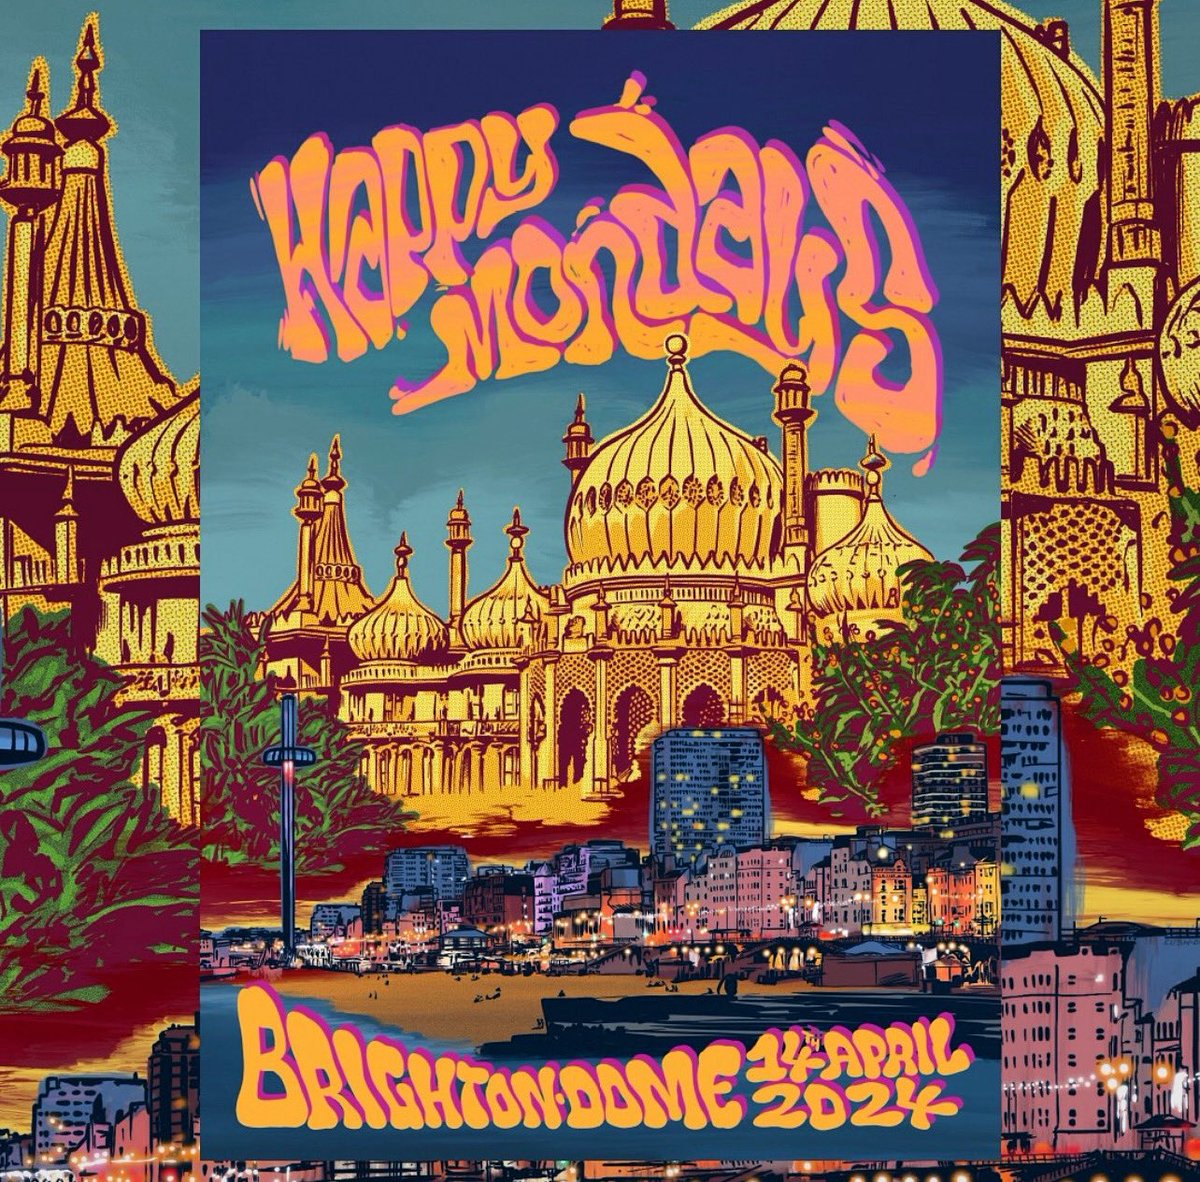 The last show of the #HappyMondays ‘Been There Done That’ #tour is tonight in #BRIGHTON!!! 😎🎙️🕺🏻🎸🥳🪇🎉💛 Tonight’s numbered limited edition poster designed by TCB + Cush One and signed by Shaun and Bez will be available on the merch stand. Only 25 available!!! #LiveMusic